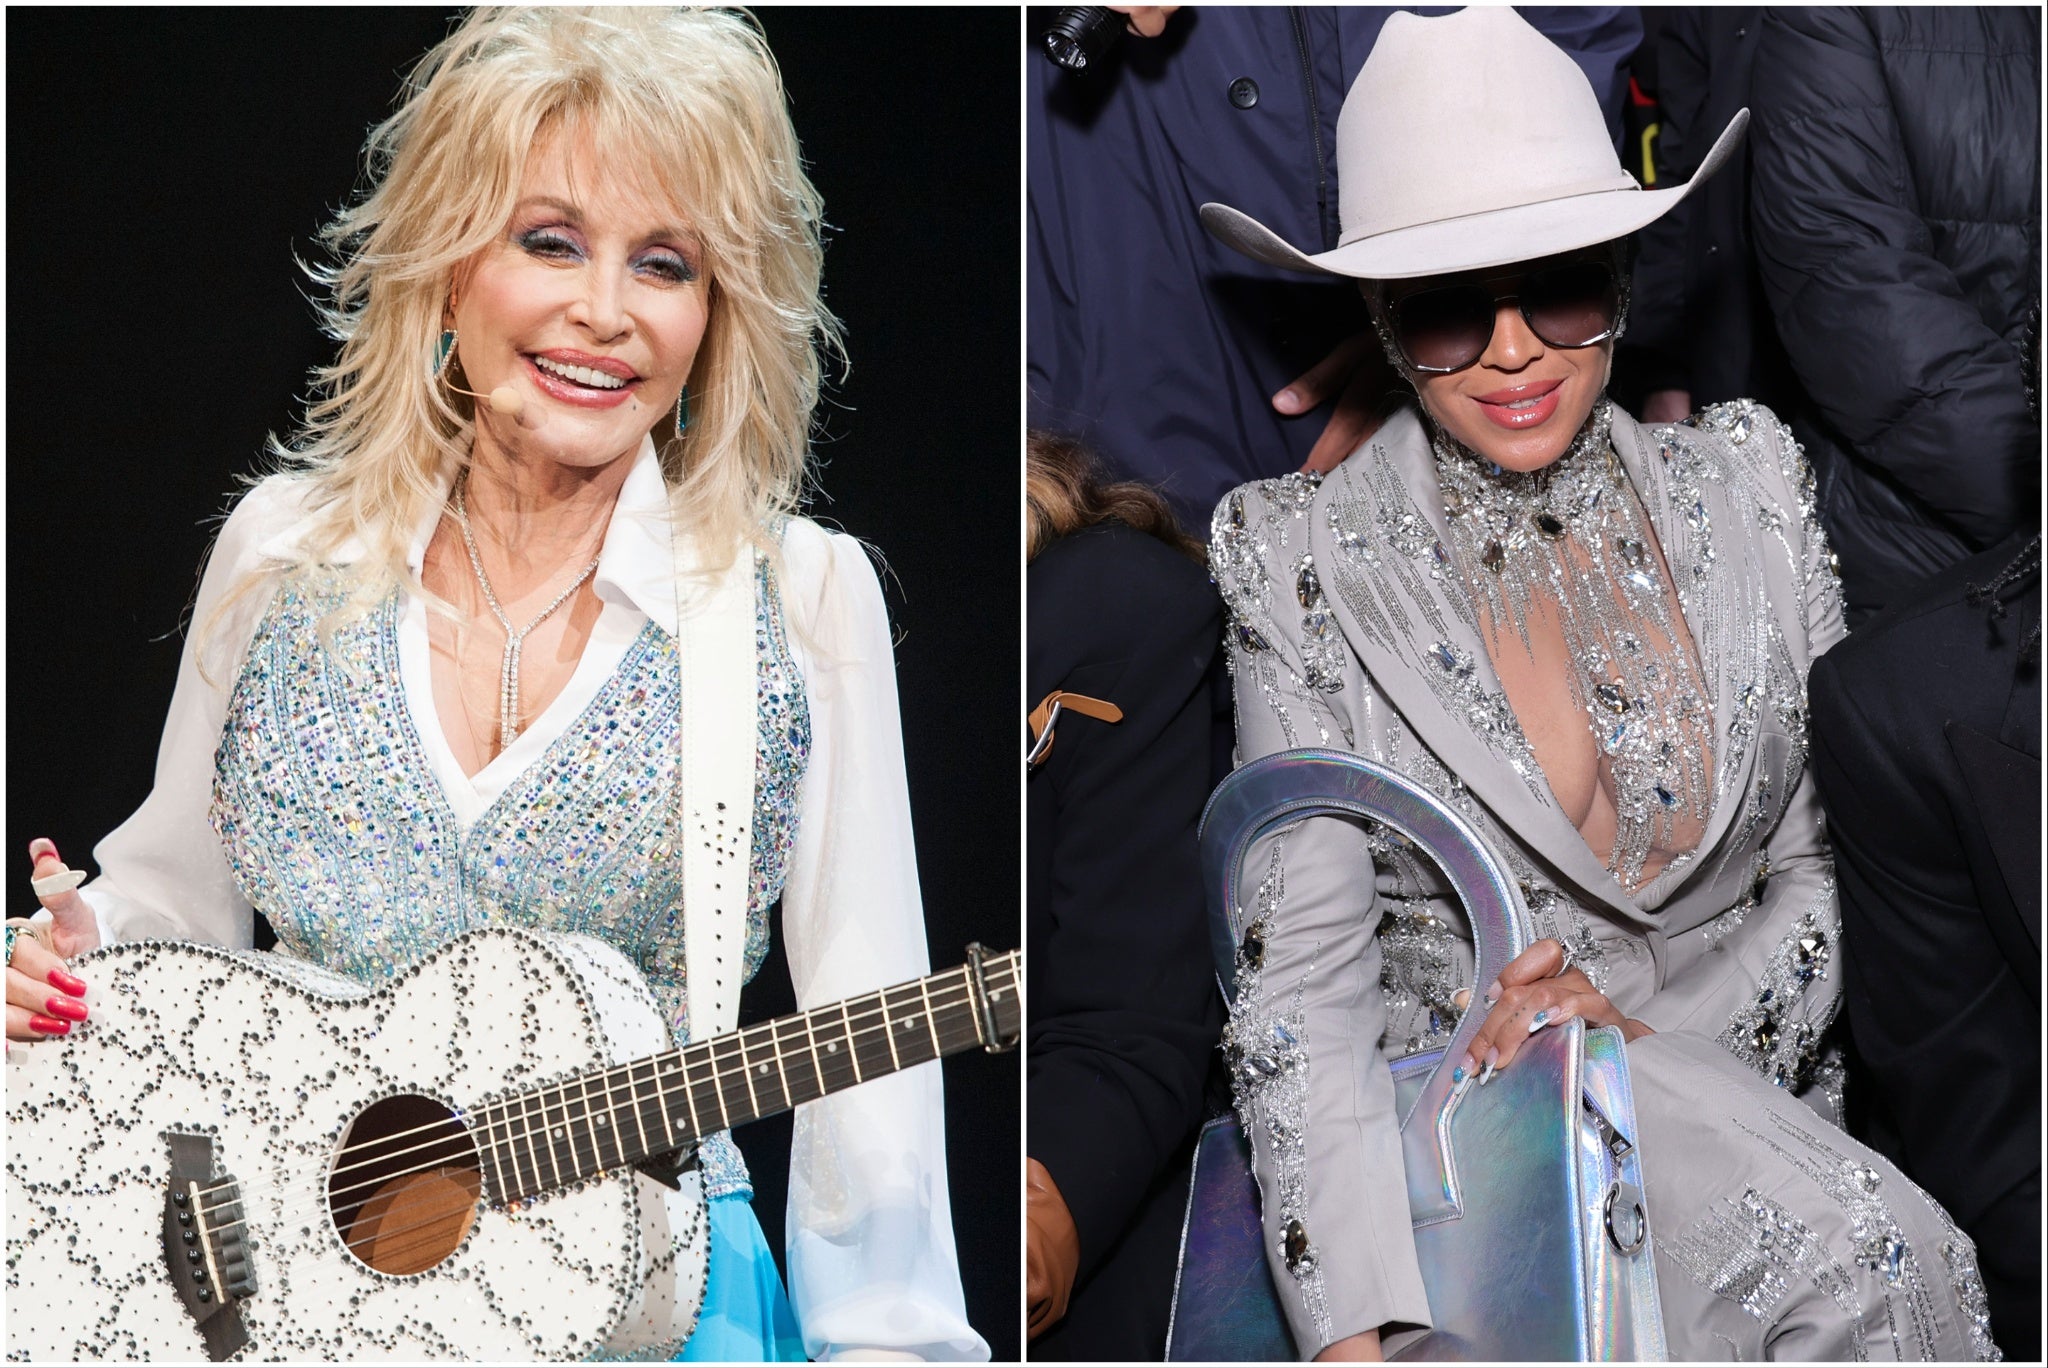 Dolly Parton is a fan of Beyonce’s venture into country music